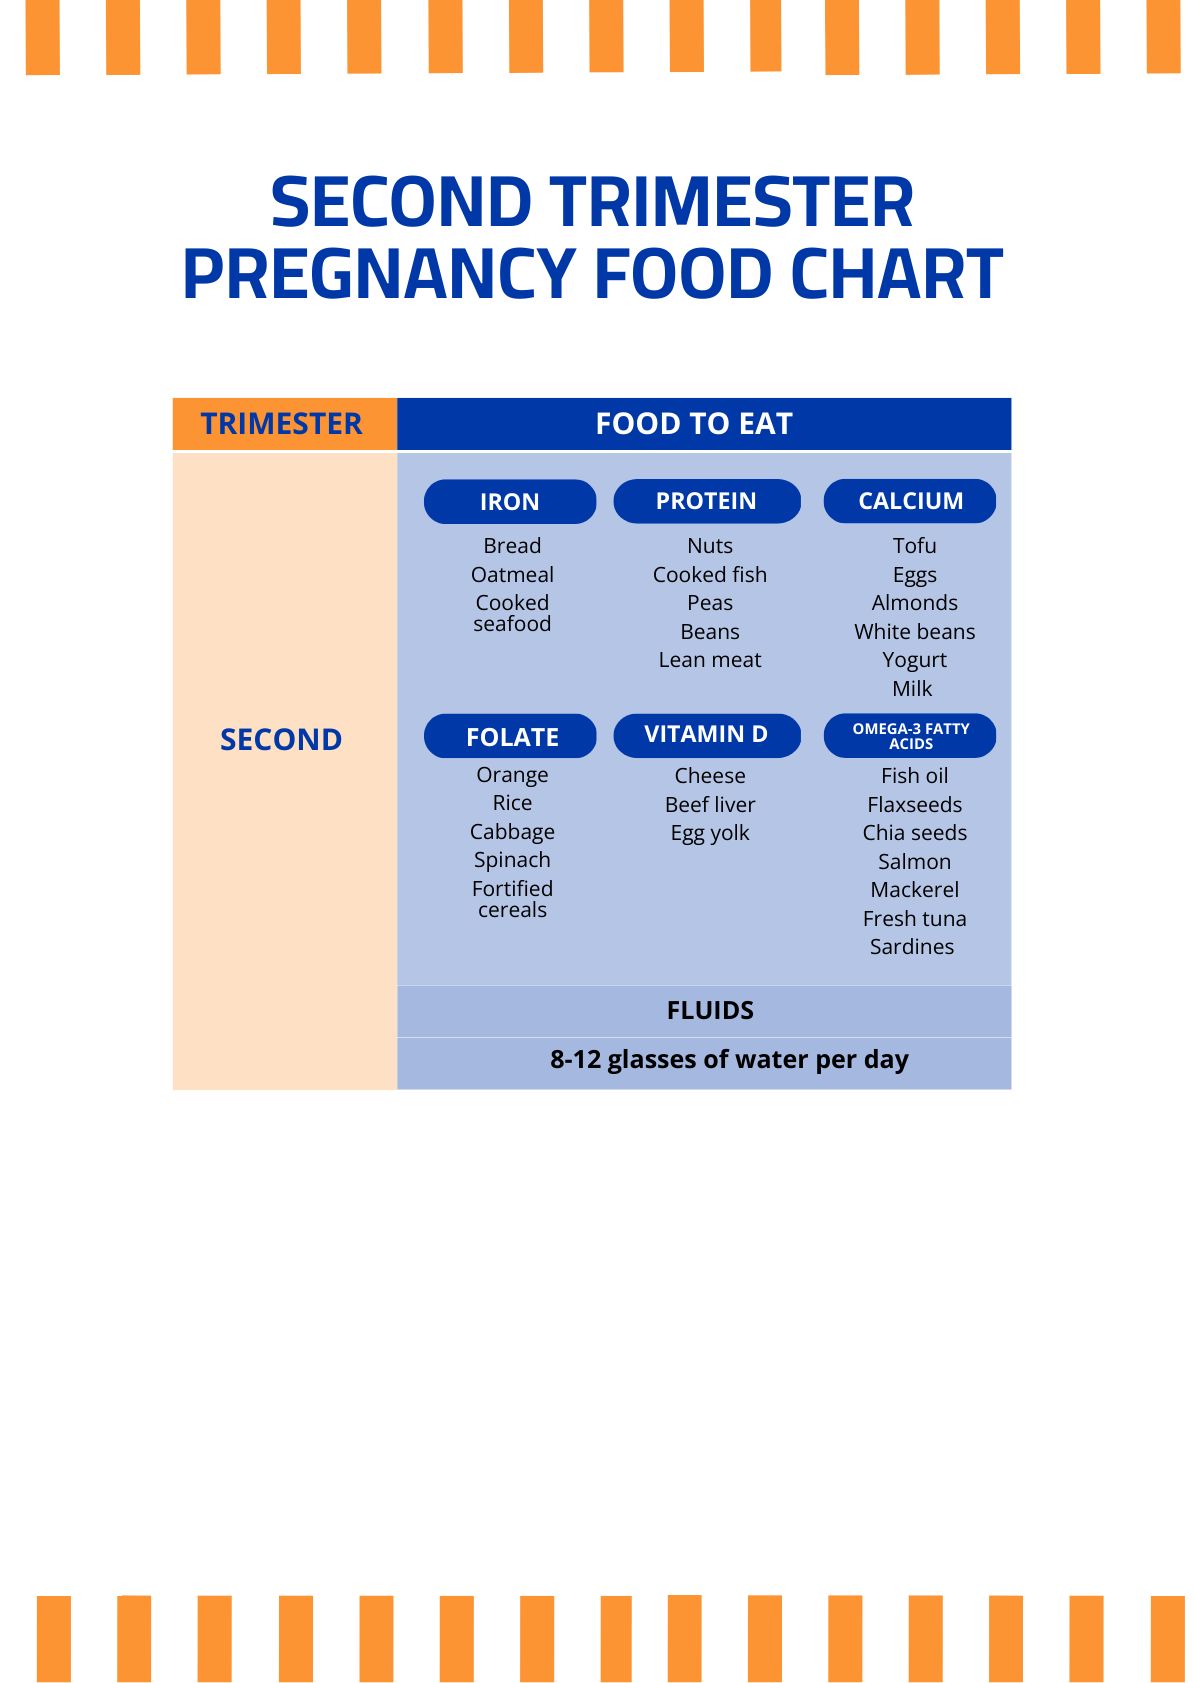 Second Trimester Pregnancy Food Chart in PDF